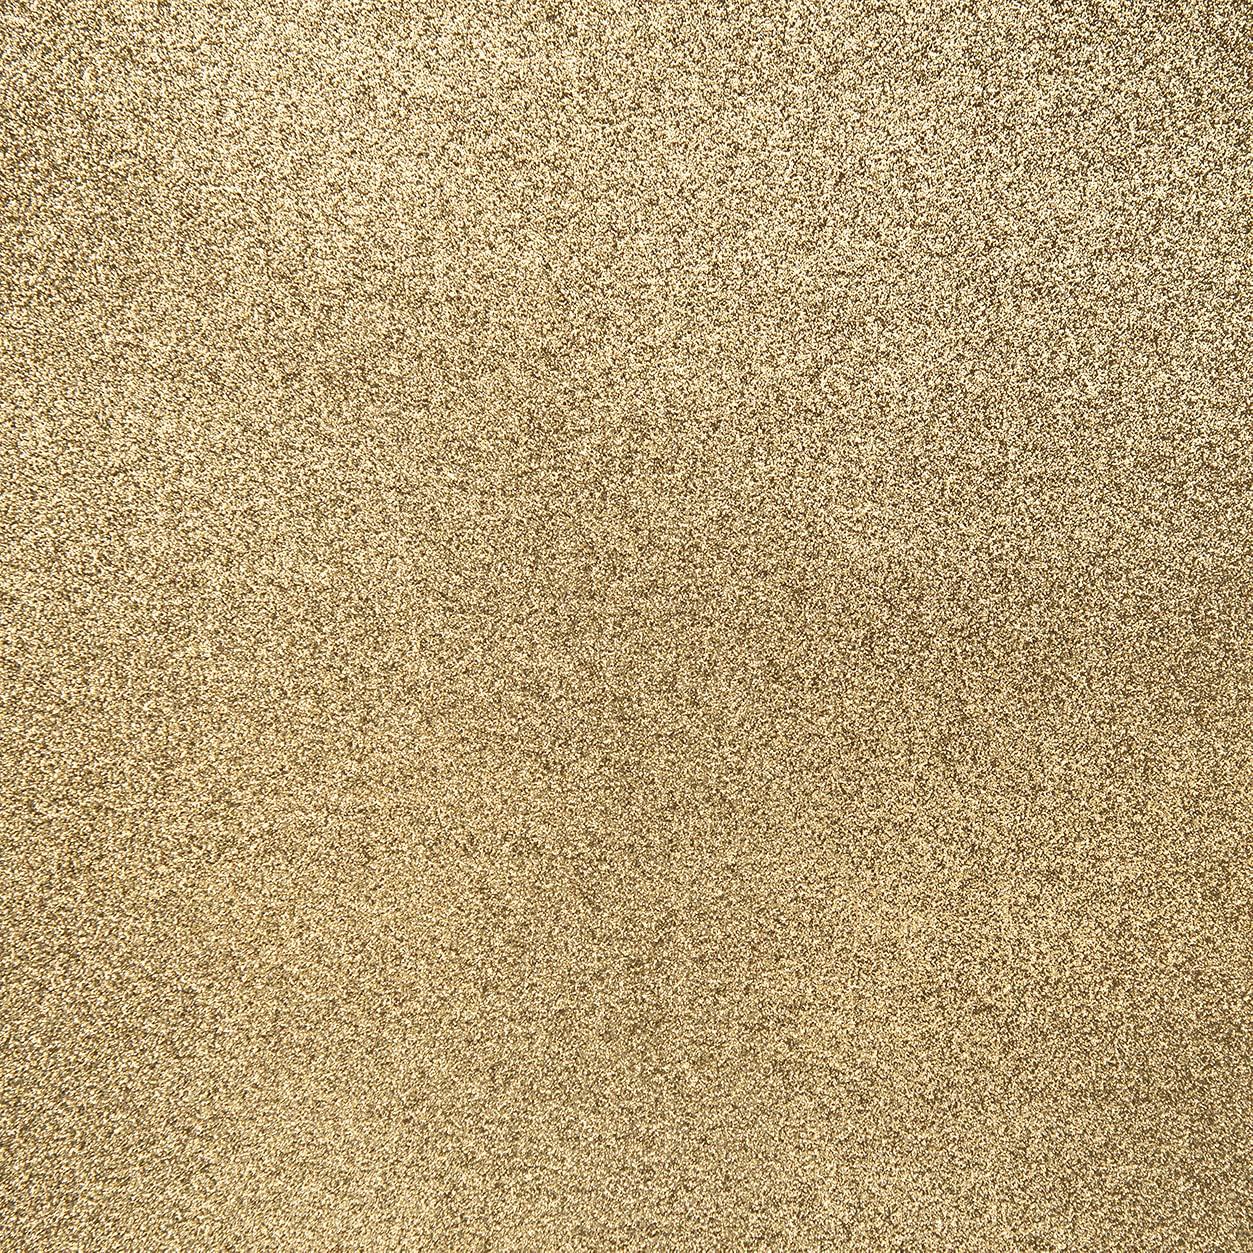 Gold Glitter Cardstock - 10 Sheets Premium Glitter Paper - Sized 12 x 12 -  Perfect for Scrapbooking Crafts